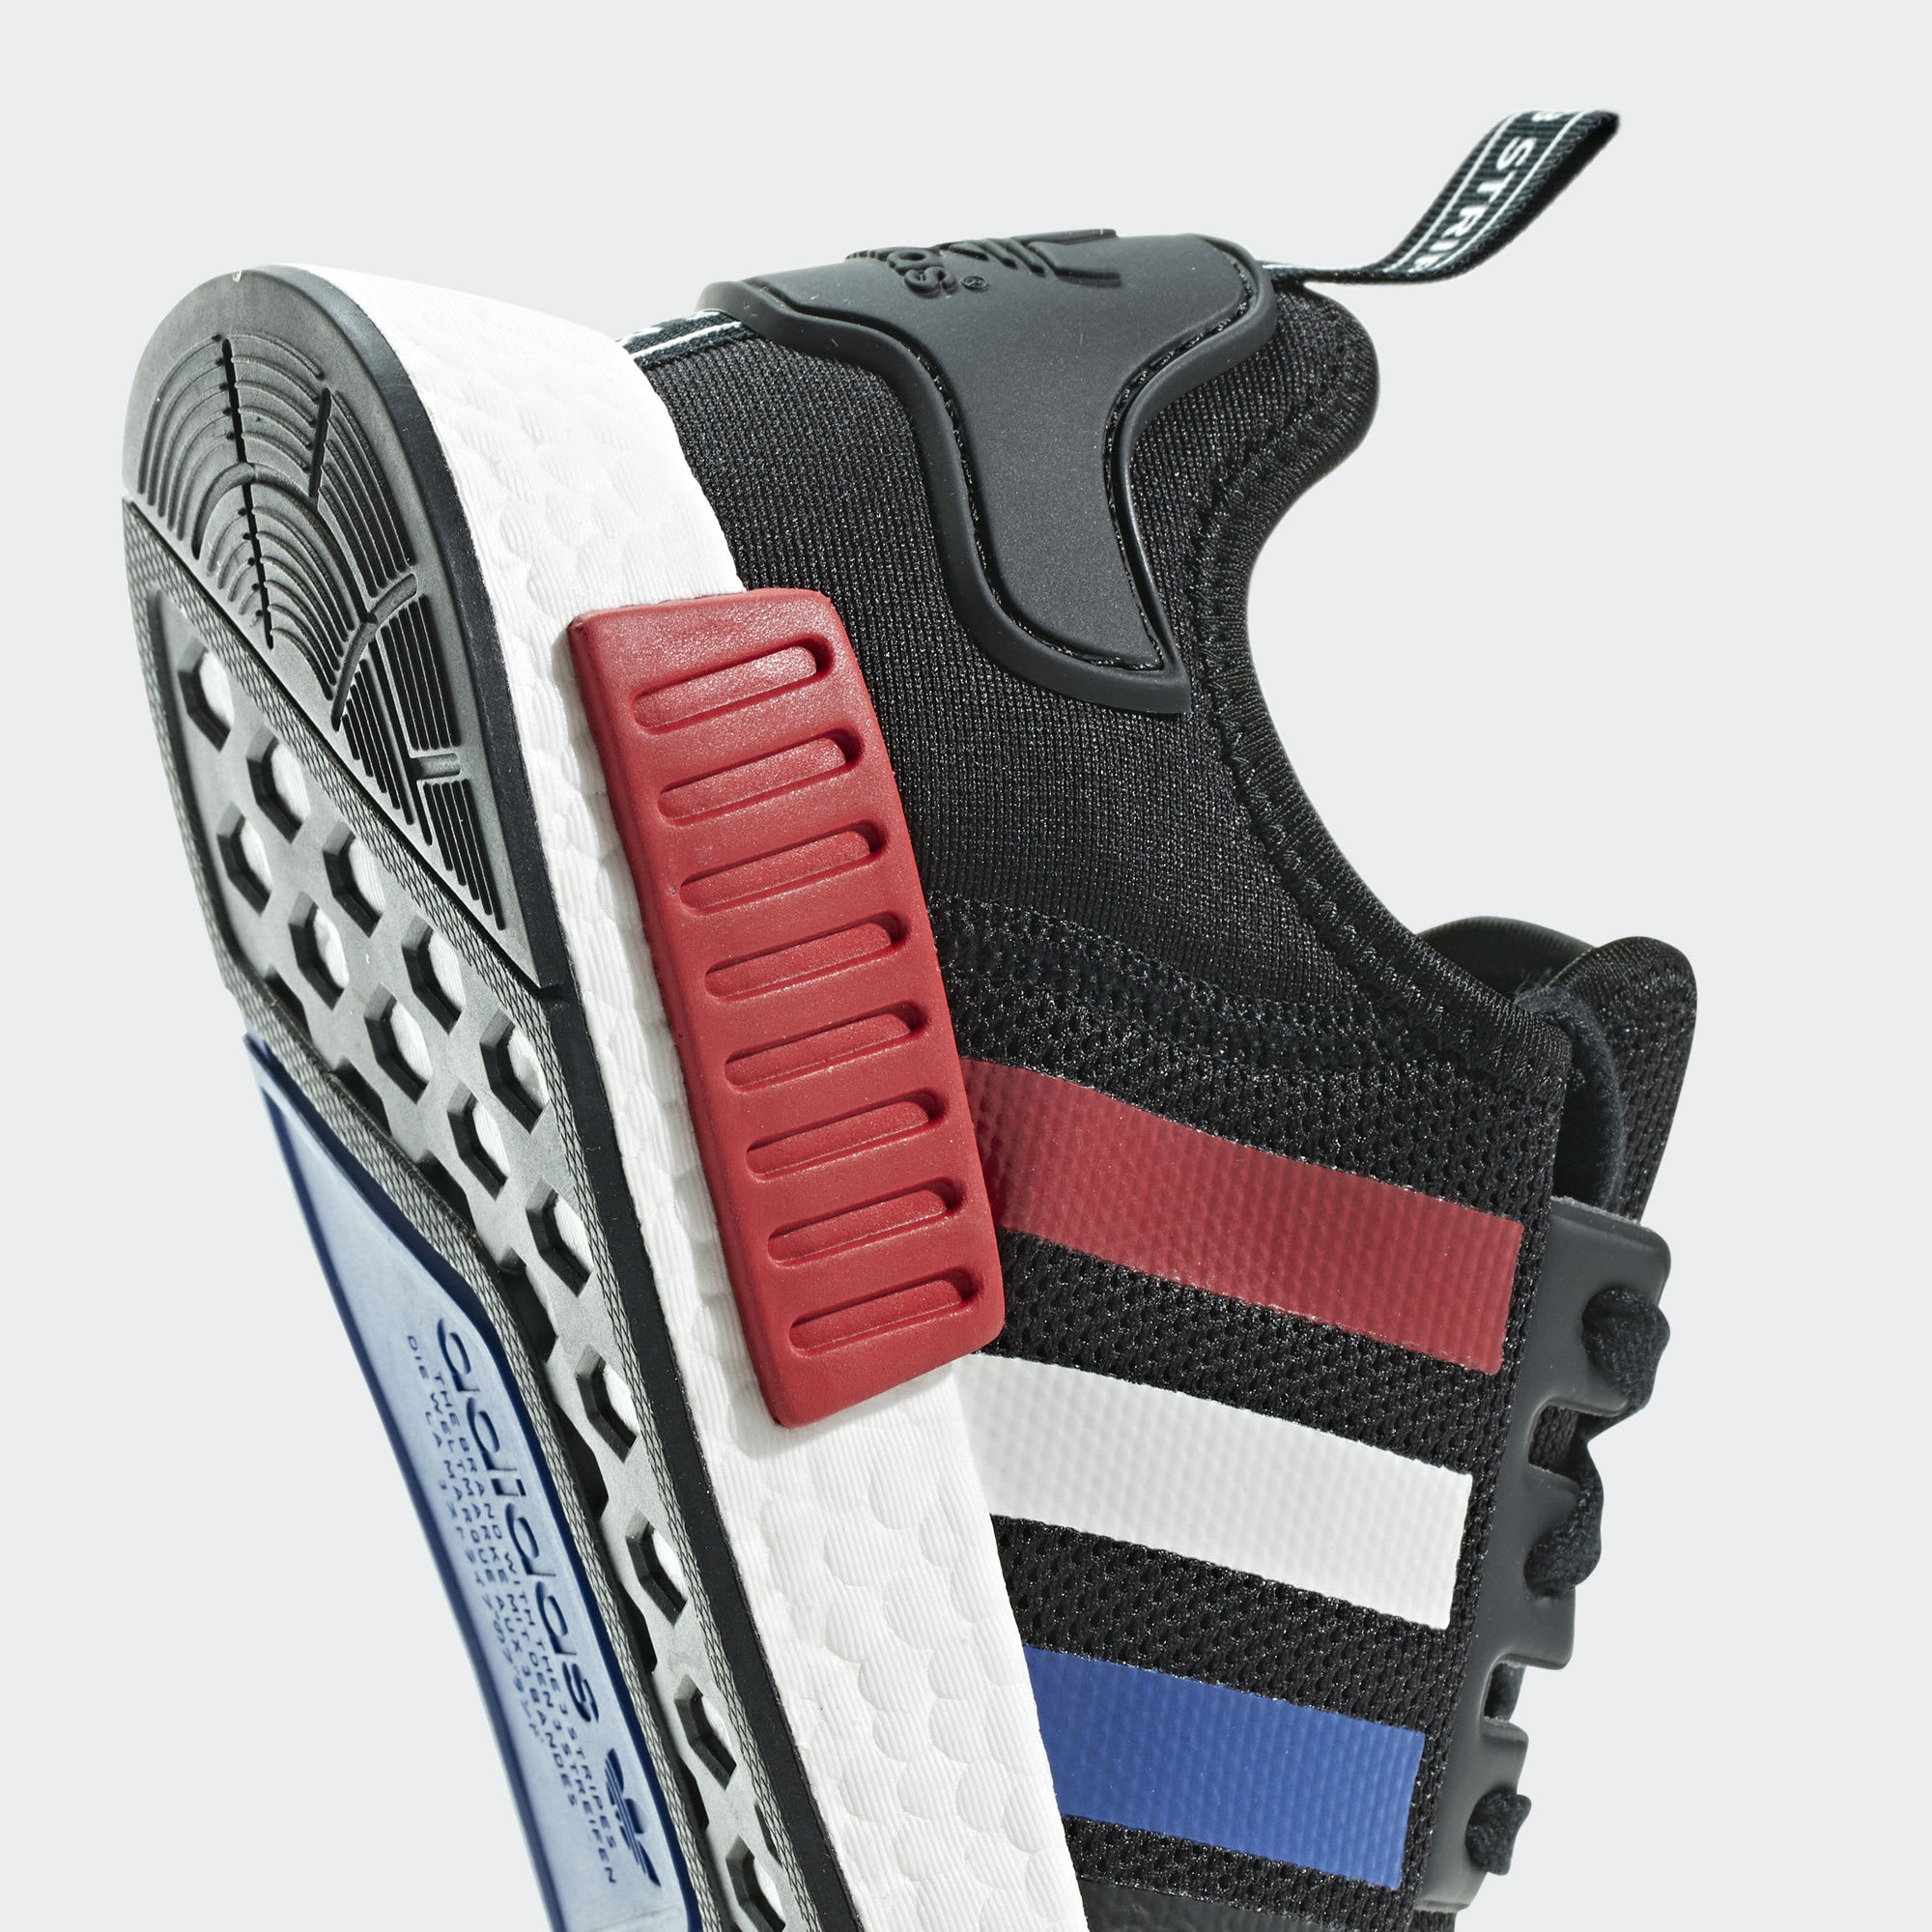 Adidas NMD R1 Color Pack Tricolor Release Date F99712 Midsole